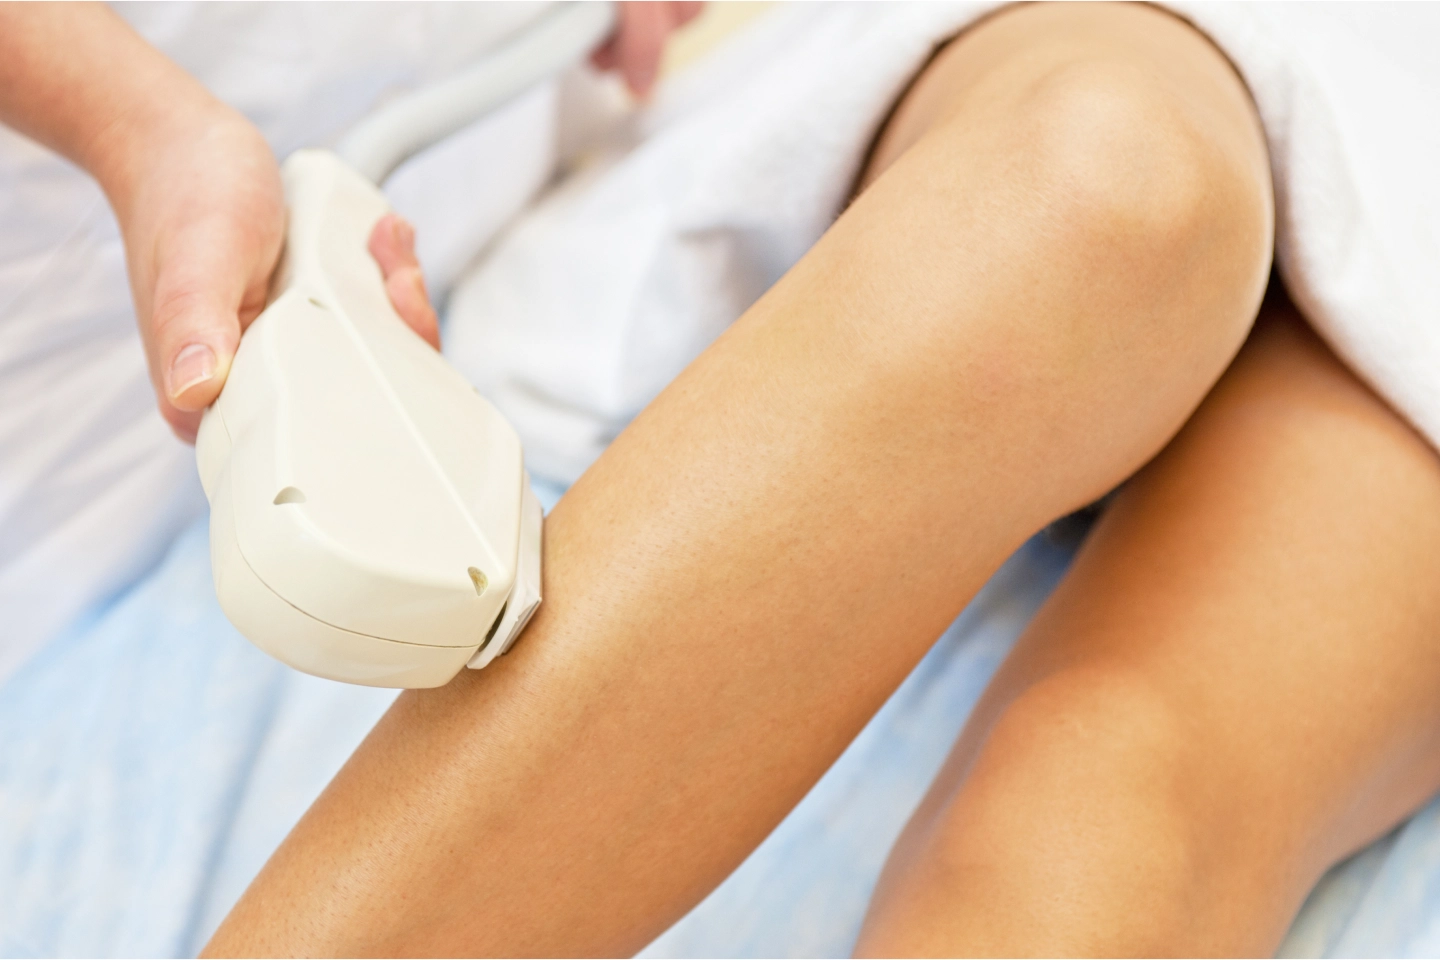 Get Painless Laser Hair Removal at Lily Aesthetics in Parker